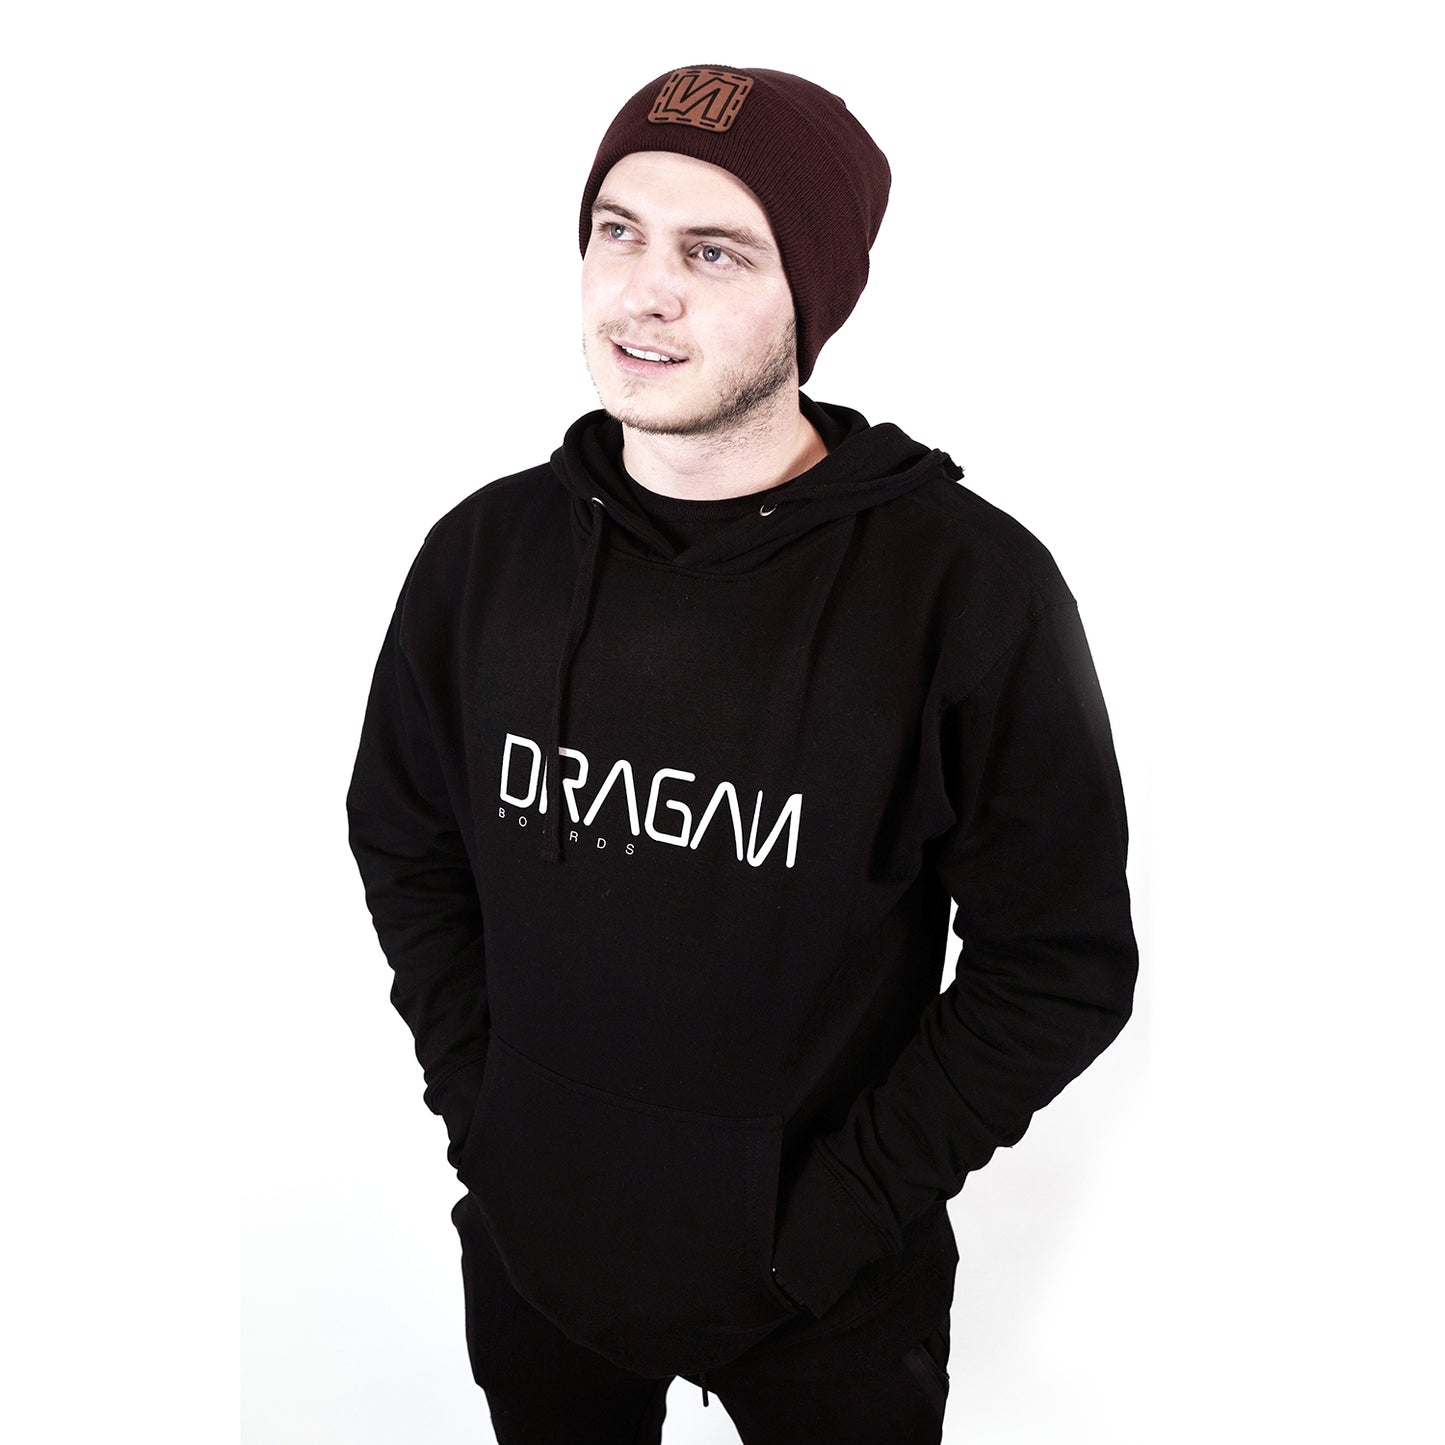 Guy wearing a black hoodie with a Dragan logo on it and a dark red beenie  on a white background